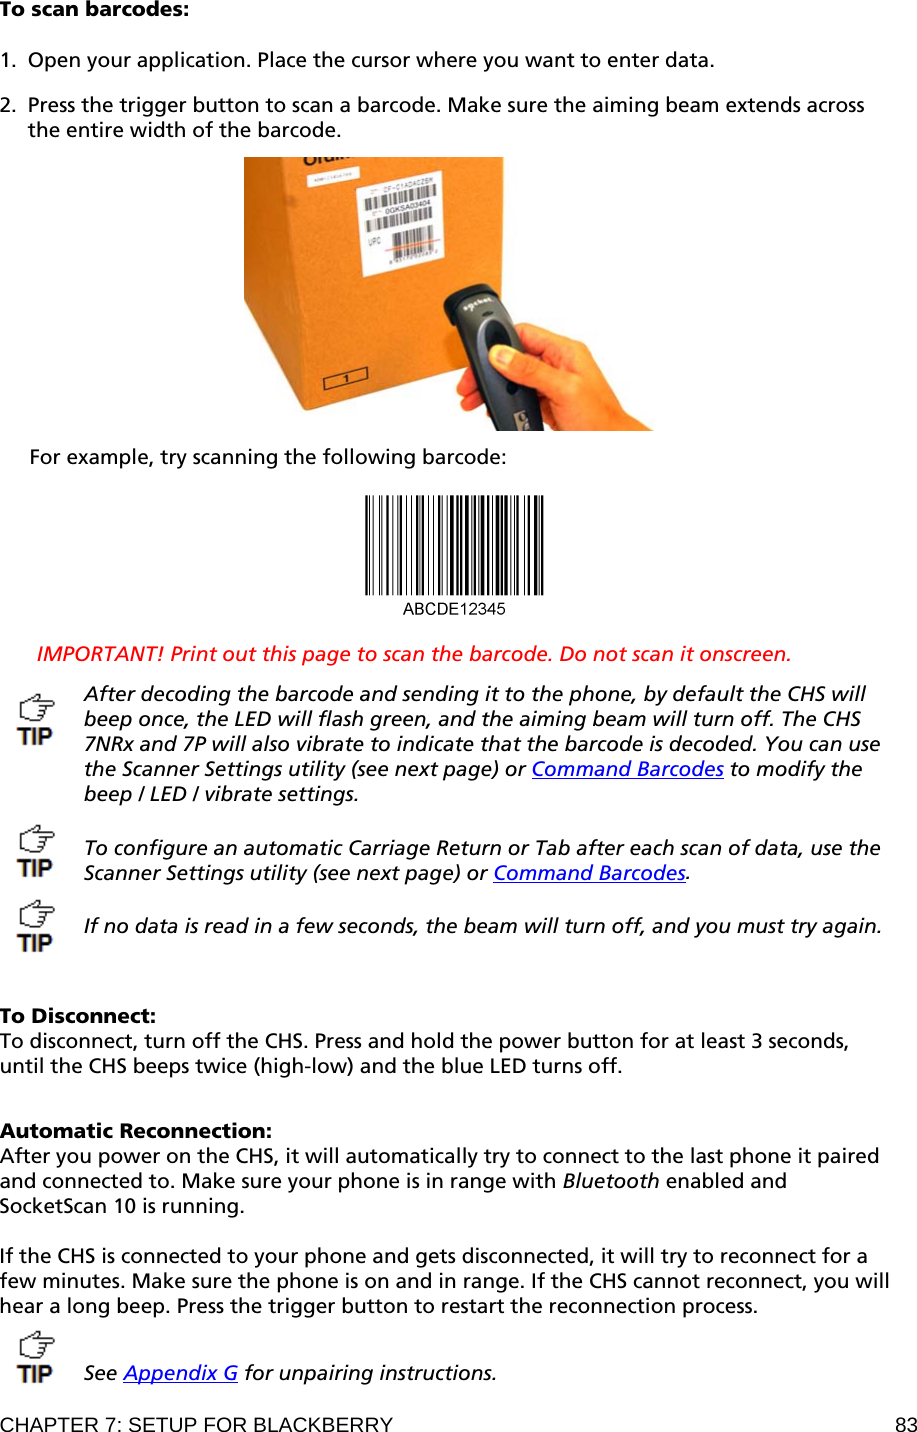 CHAPTER 7: SETUP FOR BLACKBERRY  83 To scan barcodes:  1. Open your application. Place the cursor where you want to enter data.  2. Press the trigger button to scan a barcode. Make sure the aiming beam extends across the entire width of the barcode.    For example, try scanning the following barcode:    IMPORTANT! Print out this page to scan the barcode. Do not scan it onscreen.  After decoding the barcode and sending it to the phone, by default the CHS will beep once, the LED will flash green, and the aiming beam will turn off. The CHS 7NRx and 7P will also vibrate to indicate that the barcode is decoded. You can use the Scanner Settings utility (see next page) or Command Barcodes to modify the beep / LED / vibrate settings.   To configure an automatic Carriage Return or Tab after each scan of data, use the Scanner Settings utility (see next page) or Command Barcodes.   If no data is read in a few seconds, the beam will turn off, and you must try again.    To Disconnect: To disconnect, turn off the CHS. Press and hold the power button for at least 3 seconds, until the CHS beeps twice (high-low) and the blue LED turns off.   Automatic Reconnection:  After you power on the CHS, it will automatically try to connect to the last phone it paired and connected to. Make sure your phone is in range with Bluetooth enabled and SocketScan 10 is running.  If the CHS is connected to your phone and gets disconnected, it will try to reconnect for a few minutes. Make sure the phone is on and in range. If the CHS cannot reconnect, you will hear a long beep. Press the trigger button to restart the reconnection process.   See Appendix G for unpairing instructions.  